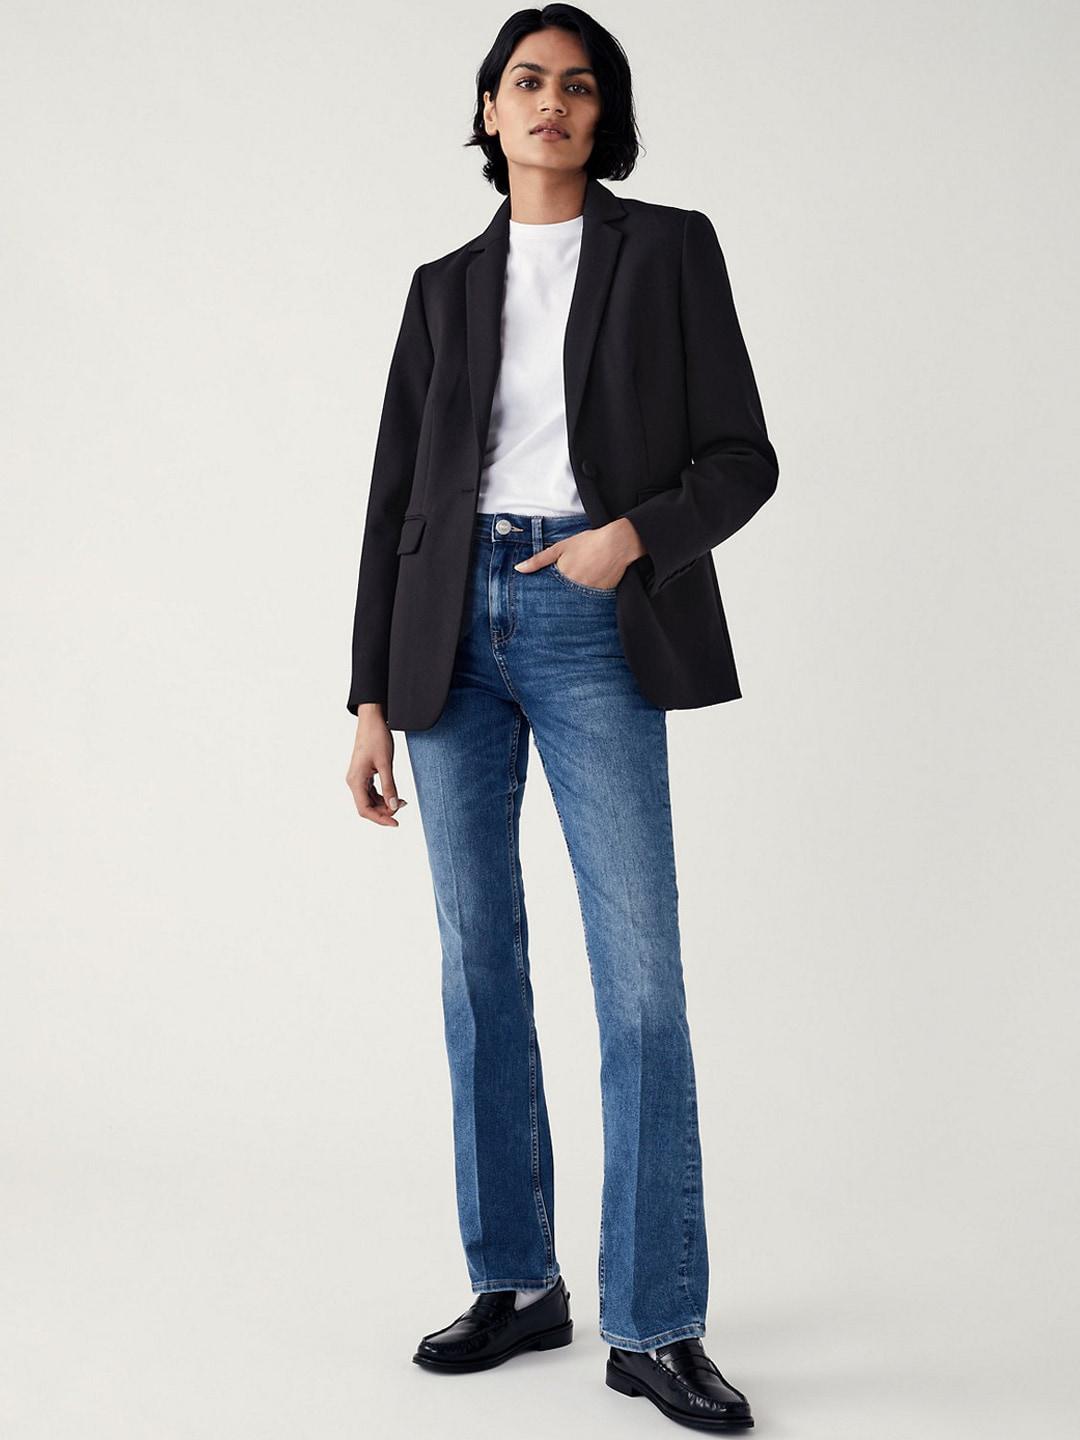 marks-&-spencer-women-bootcut-high-rise-clean-look-light-fade-stretchable-jeans